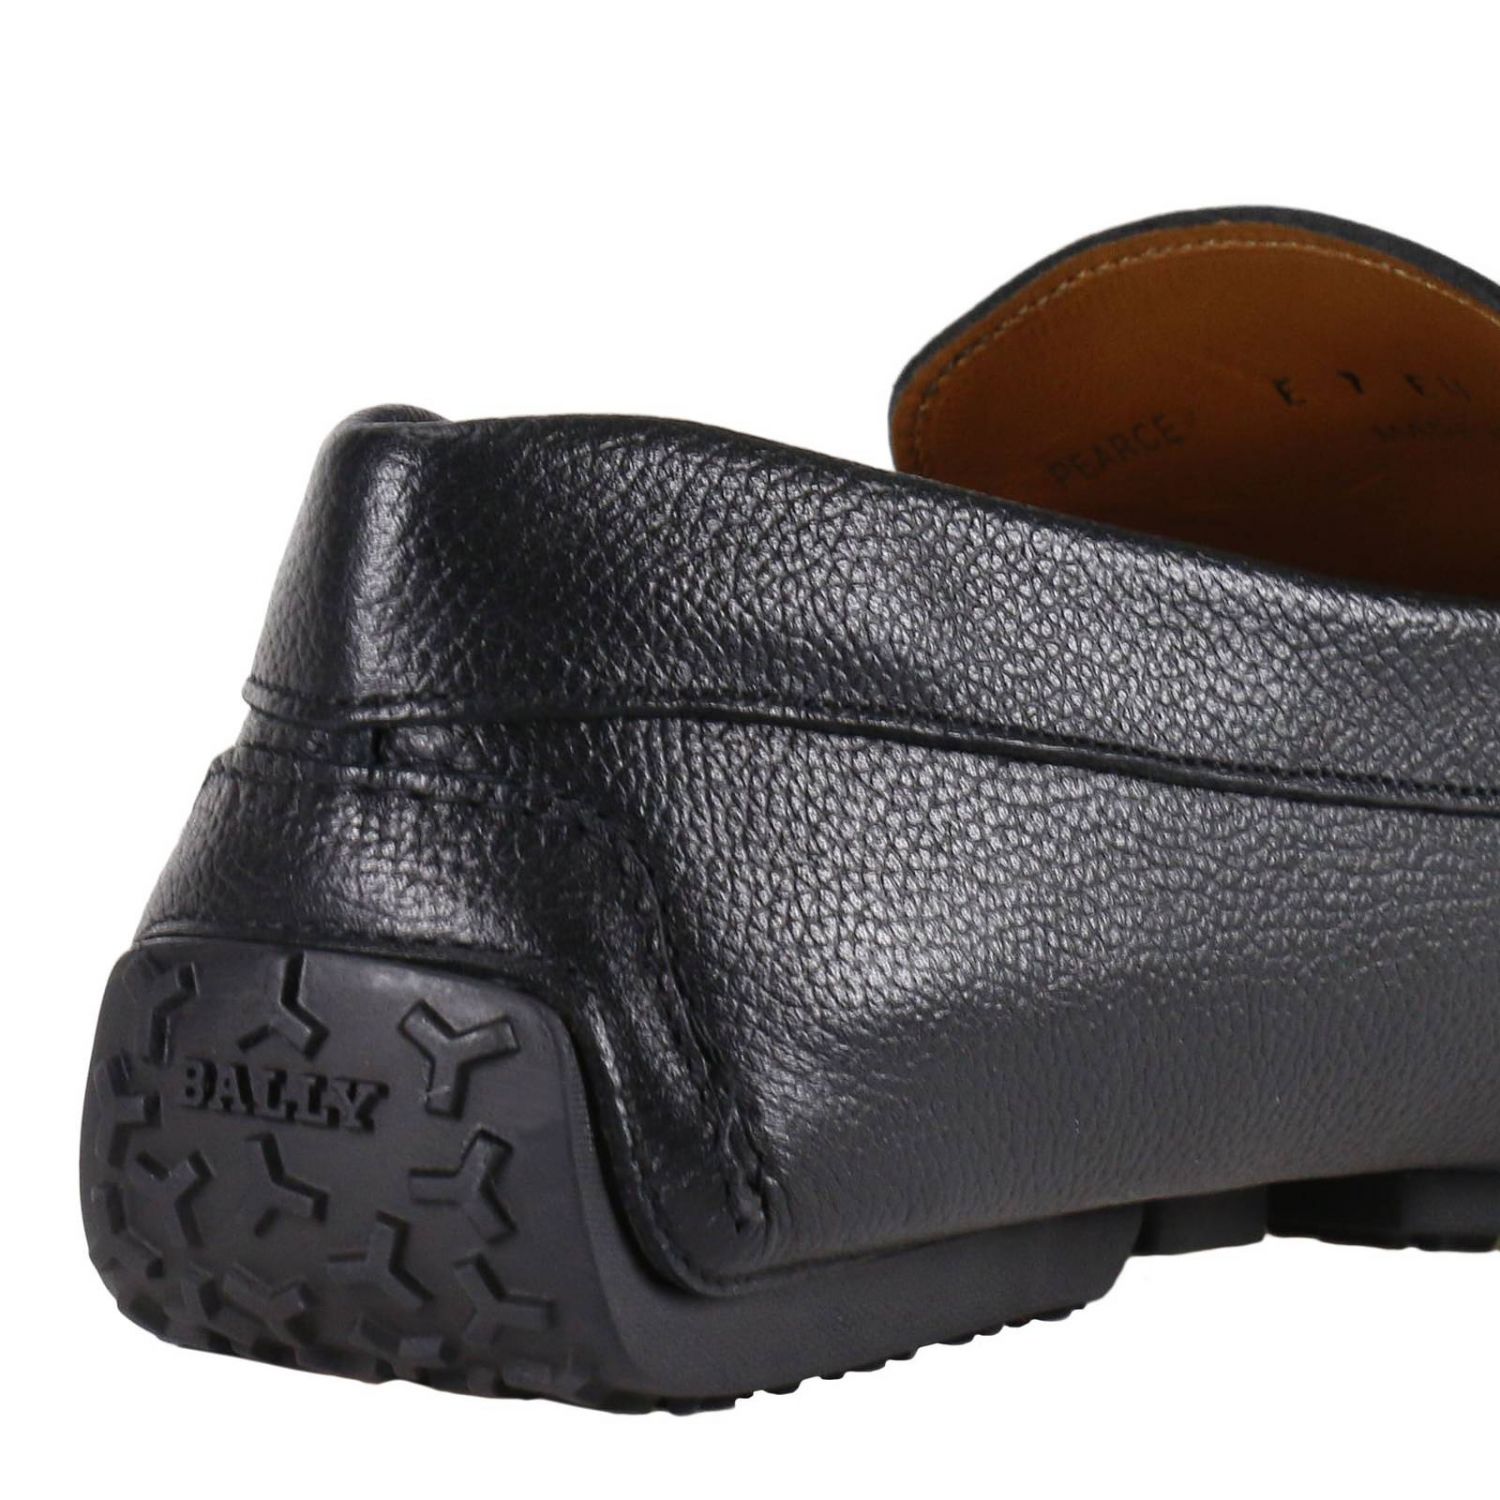 Buy > bally mens loafers > in stock